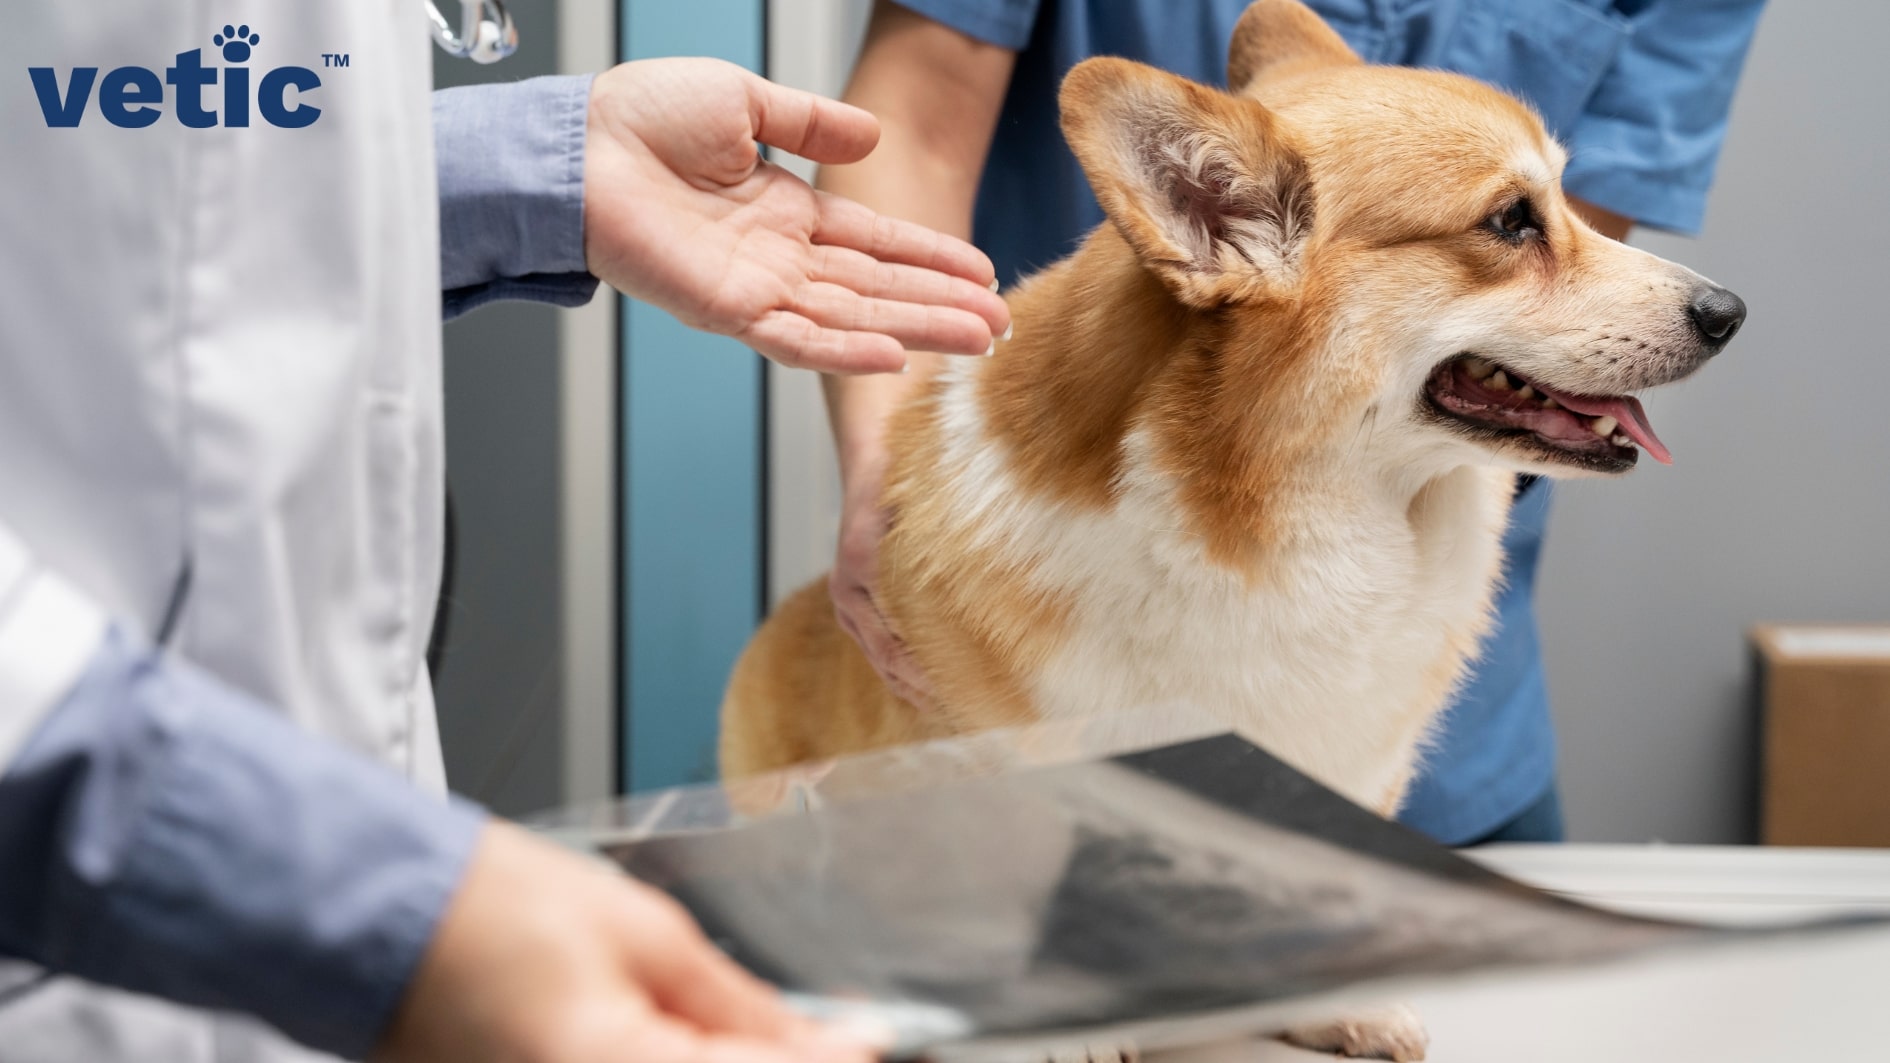 Two people visible on either side of a corgi sitting on the examination table. One is a veterinarian, apparent from their white lab coat and the other one is a veterinary assistant or nurse, apparent from their bright blue scrub. the doctor is holding a chest x-ray of the dog. it is one way to investigate why your dog is coughing.